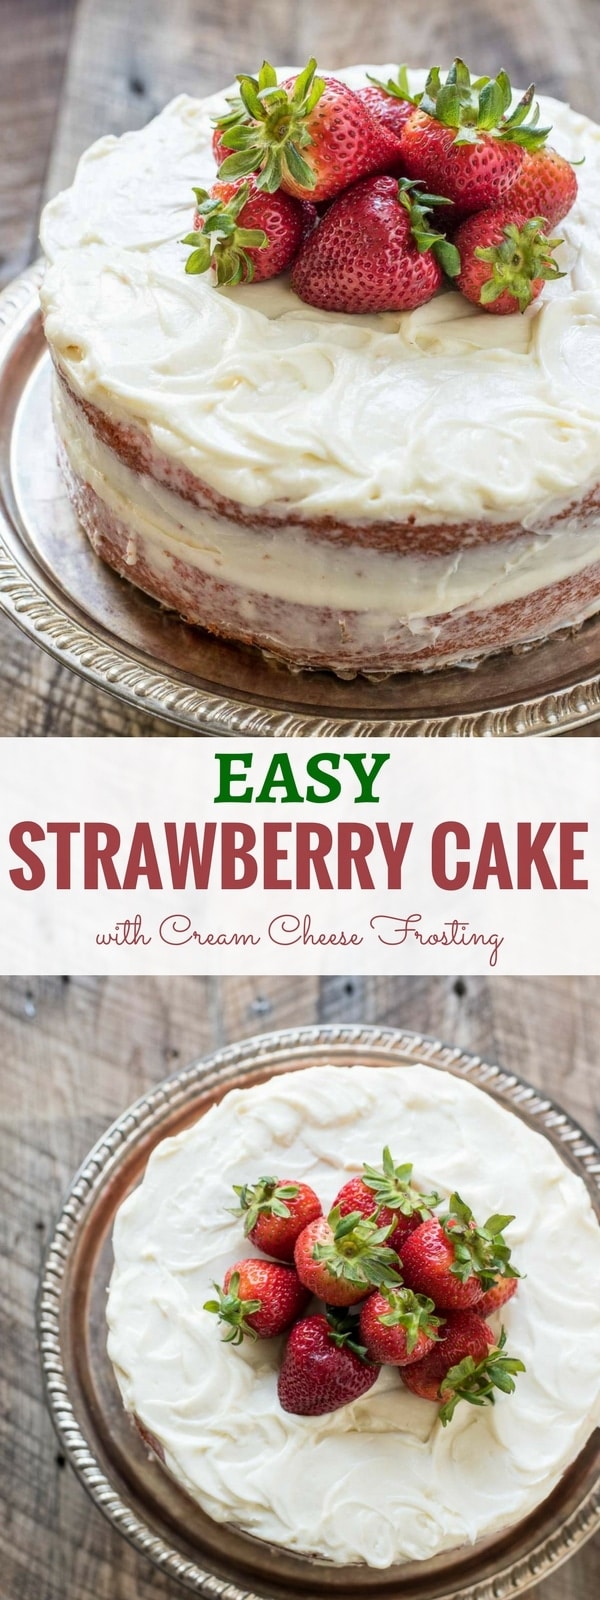 This EASY Strawberry Cake recipe makes a lovely pink layer cake full of fresh strawberry flavor and layered with cream cheese frosting.